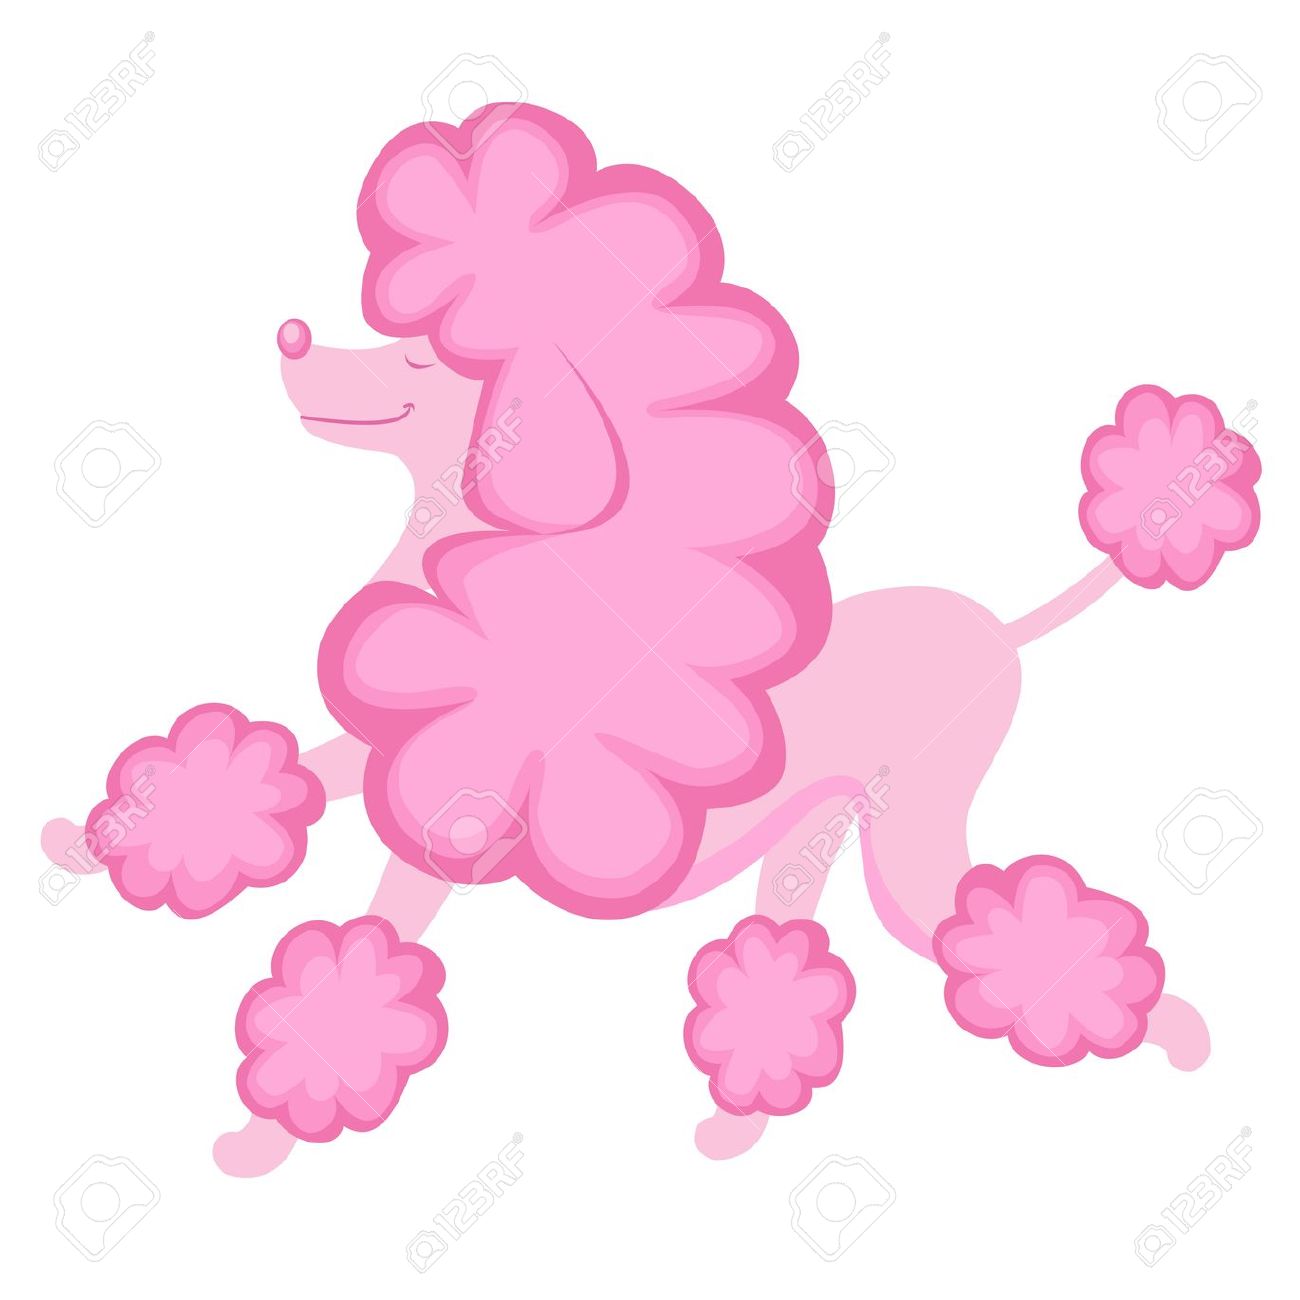 2,256 Poodle Cliparts, Stock Vector And Royalty Free Poodle.